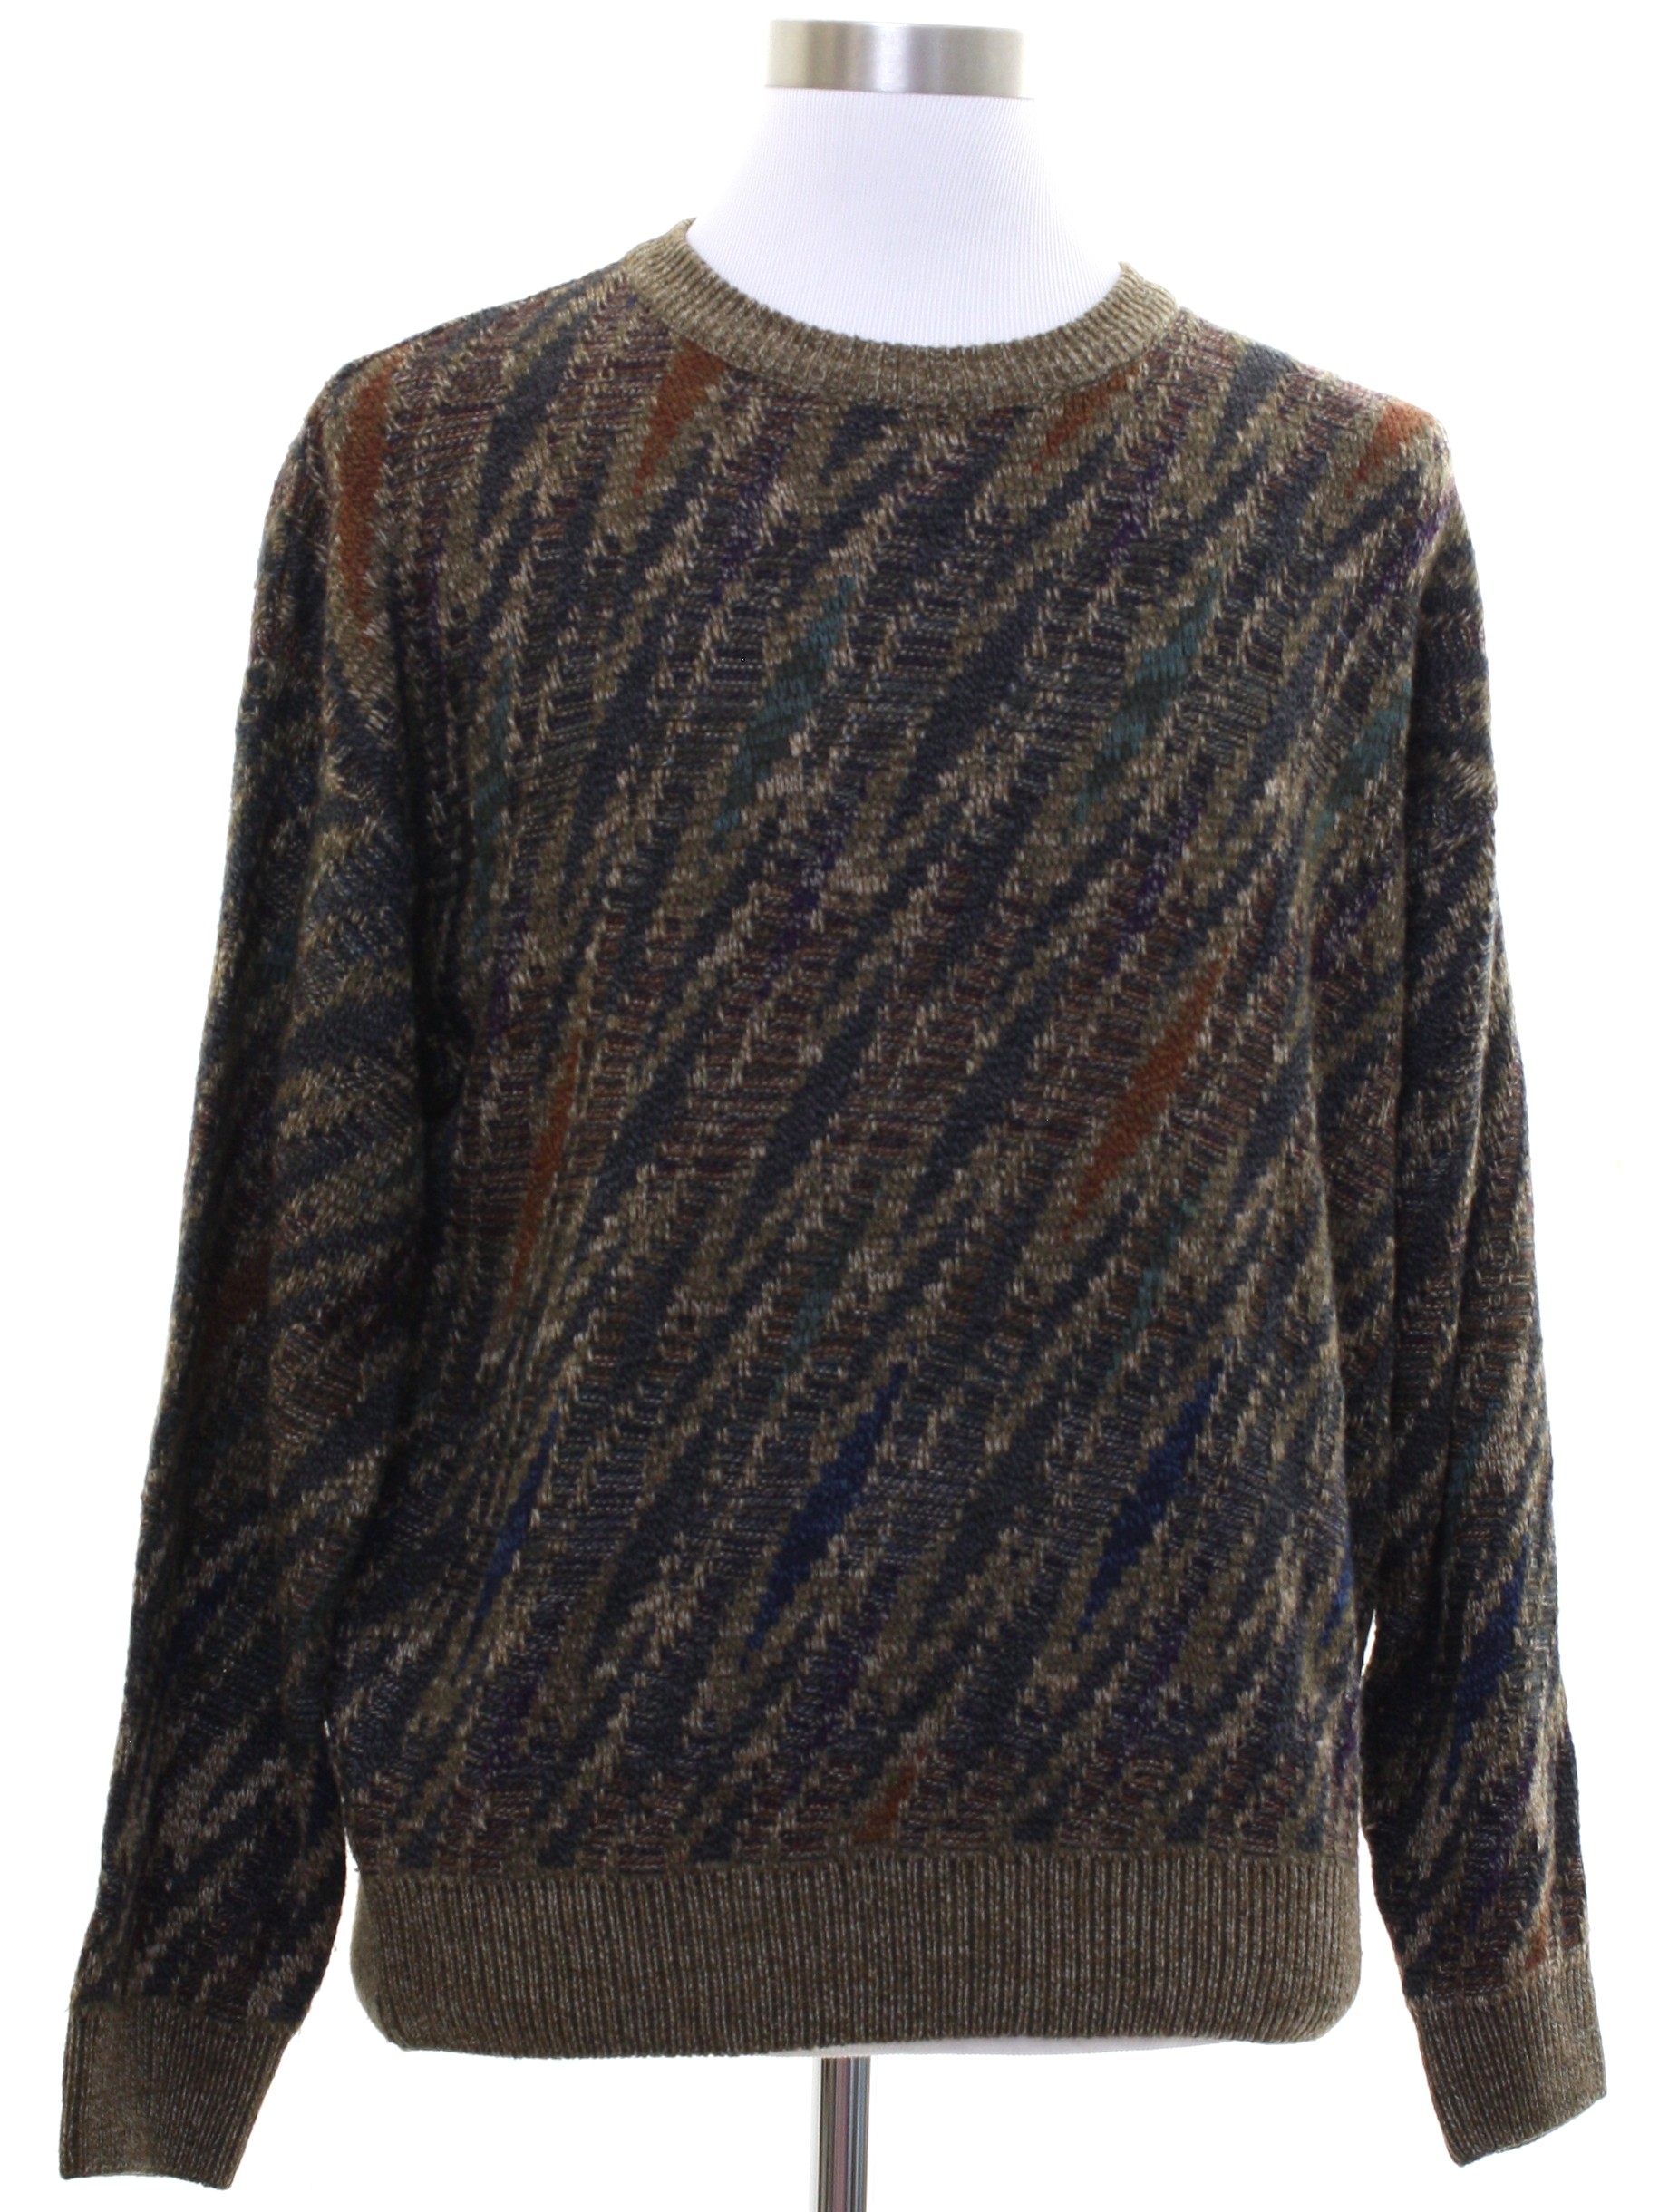 1990s Vintage Sweater: 90s -Towncraft- Mens brown background acrylic ...